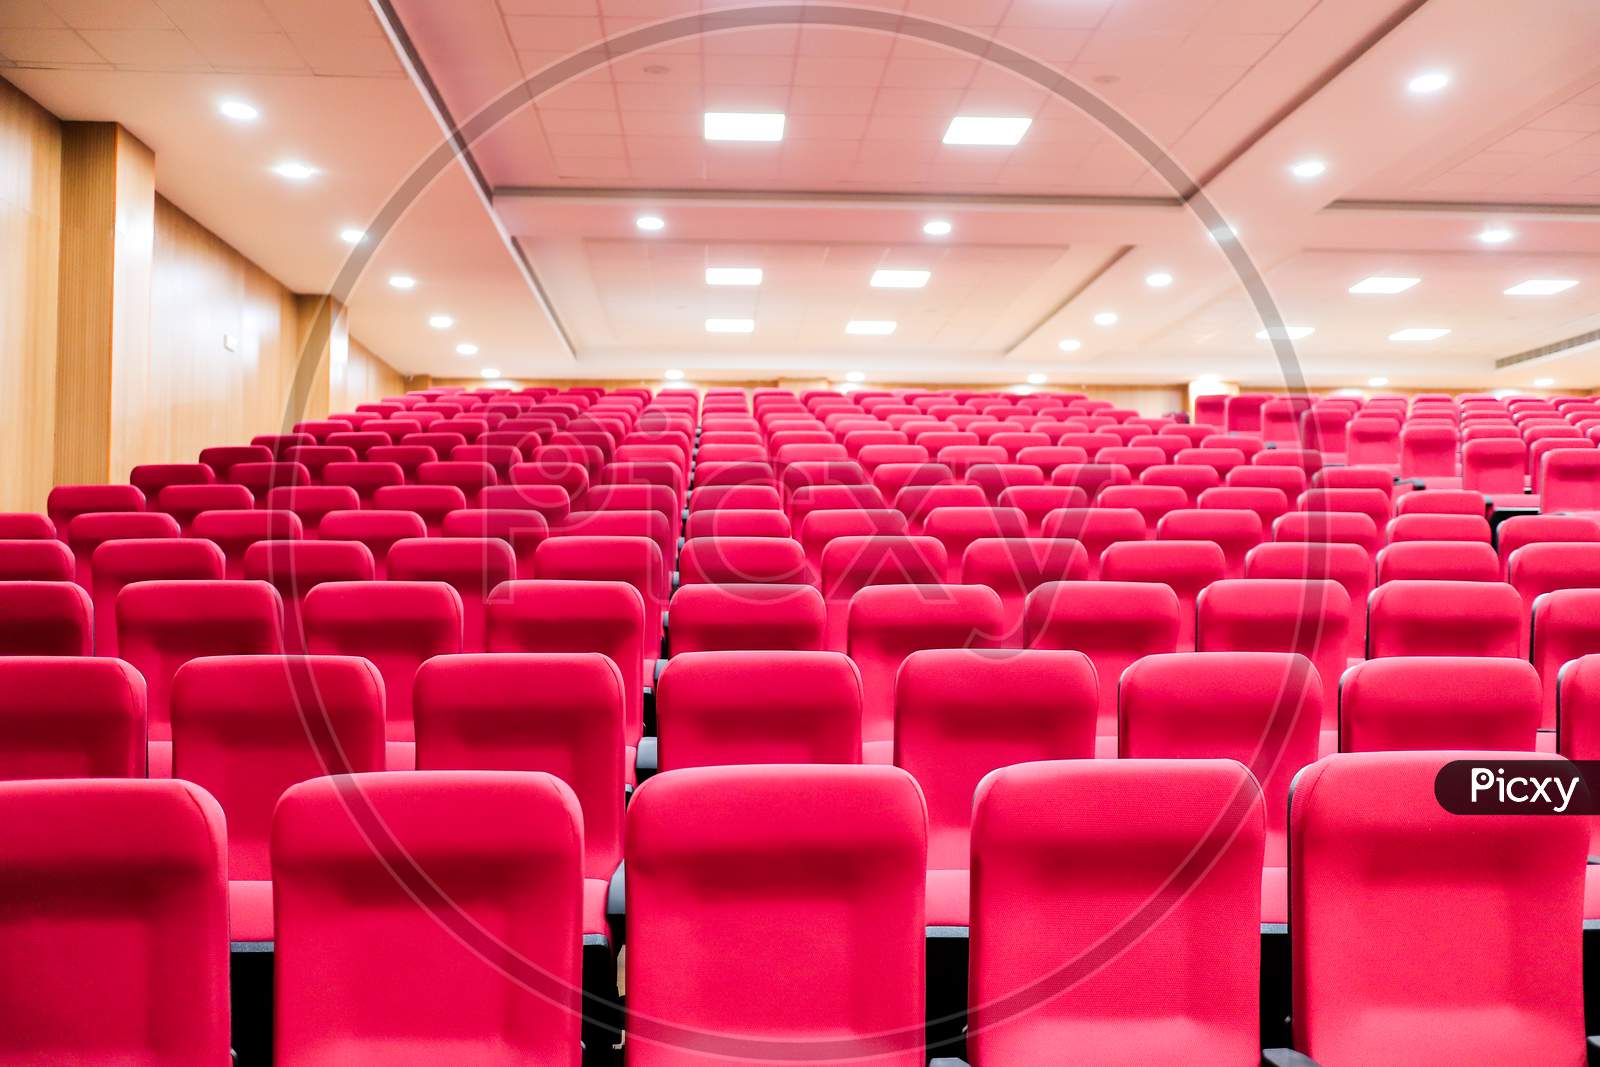 Empty Seats Of An Auditorium With Red Reclining Rows Of Seats And False Ceiling Led Lights